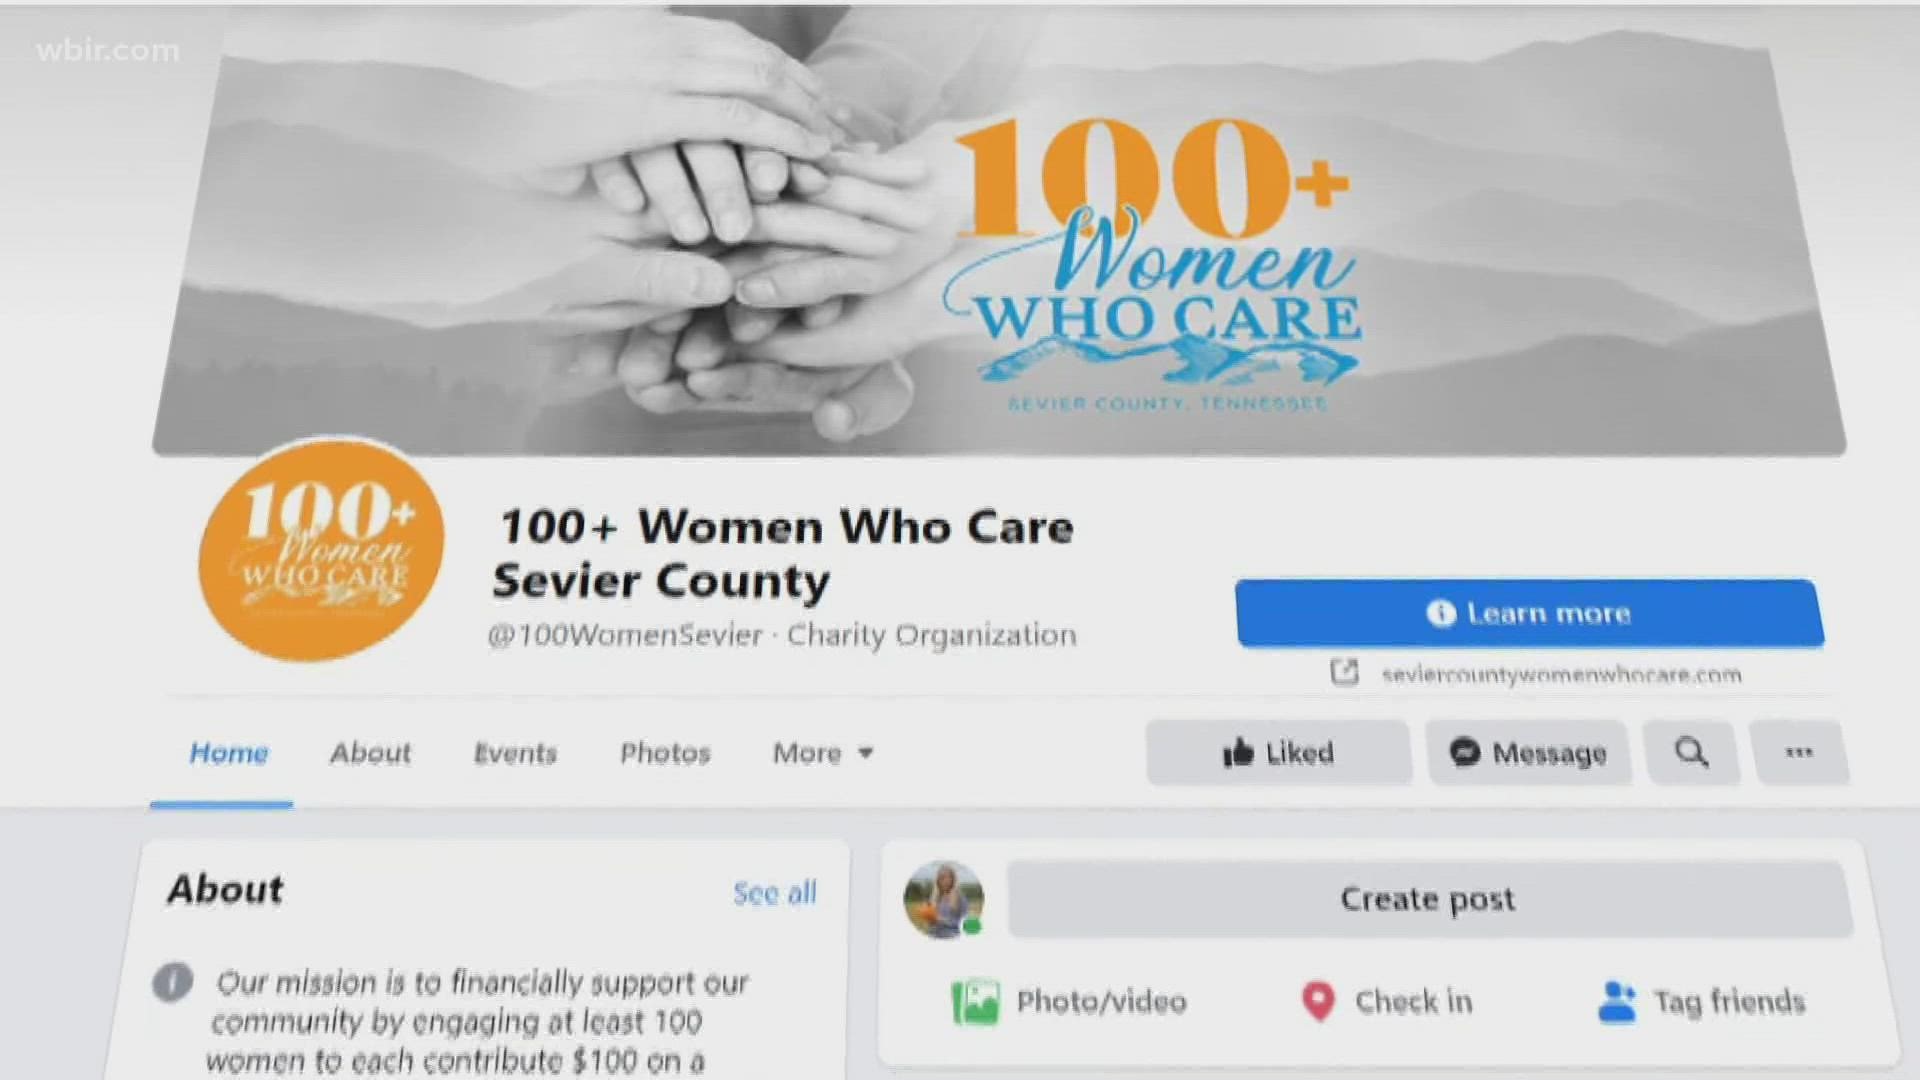 The 100+ Women who Care Sevier County pledge to give $100 four times a year so nonprofits in the area can be blessed financially.